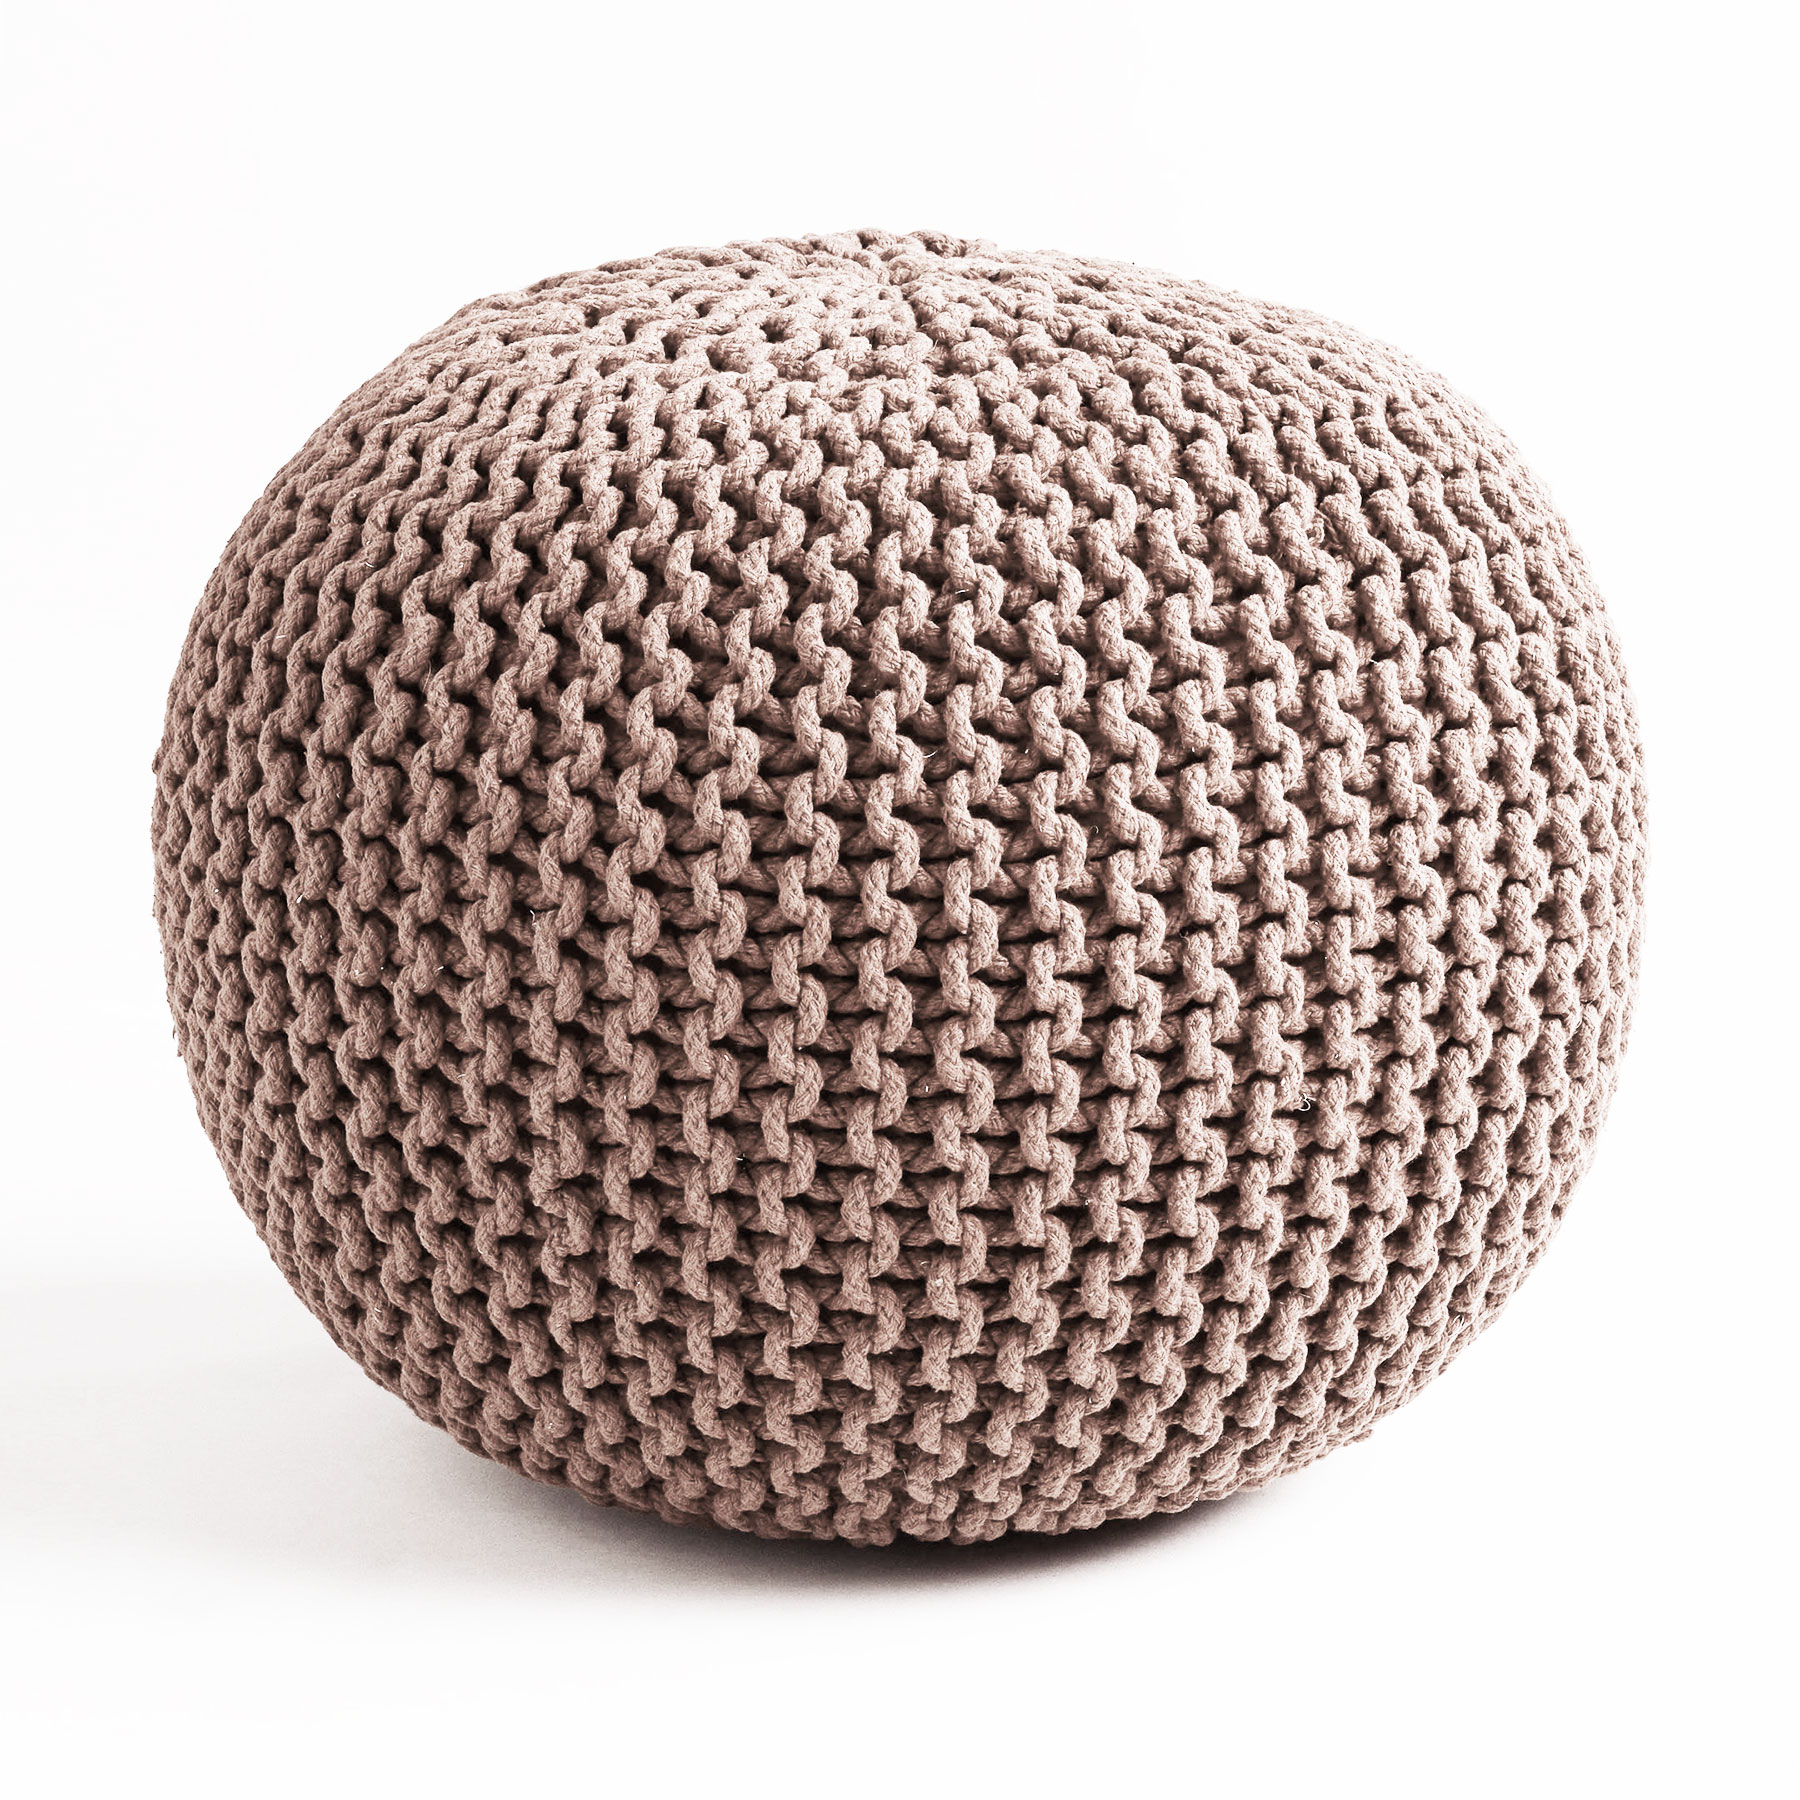 knitted pouf living room ideas with brown knit pouf oekjlgq